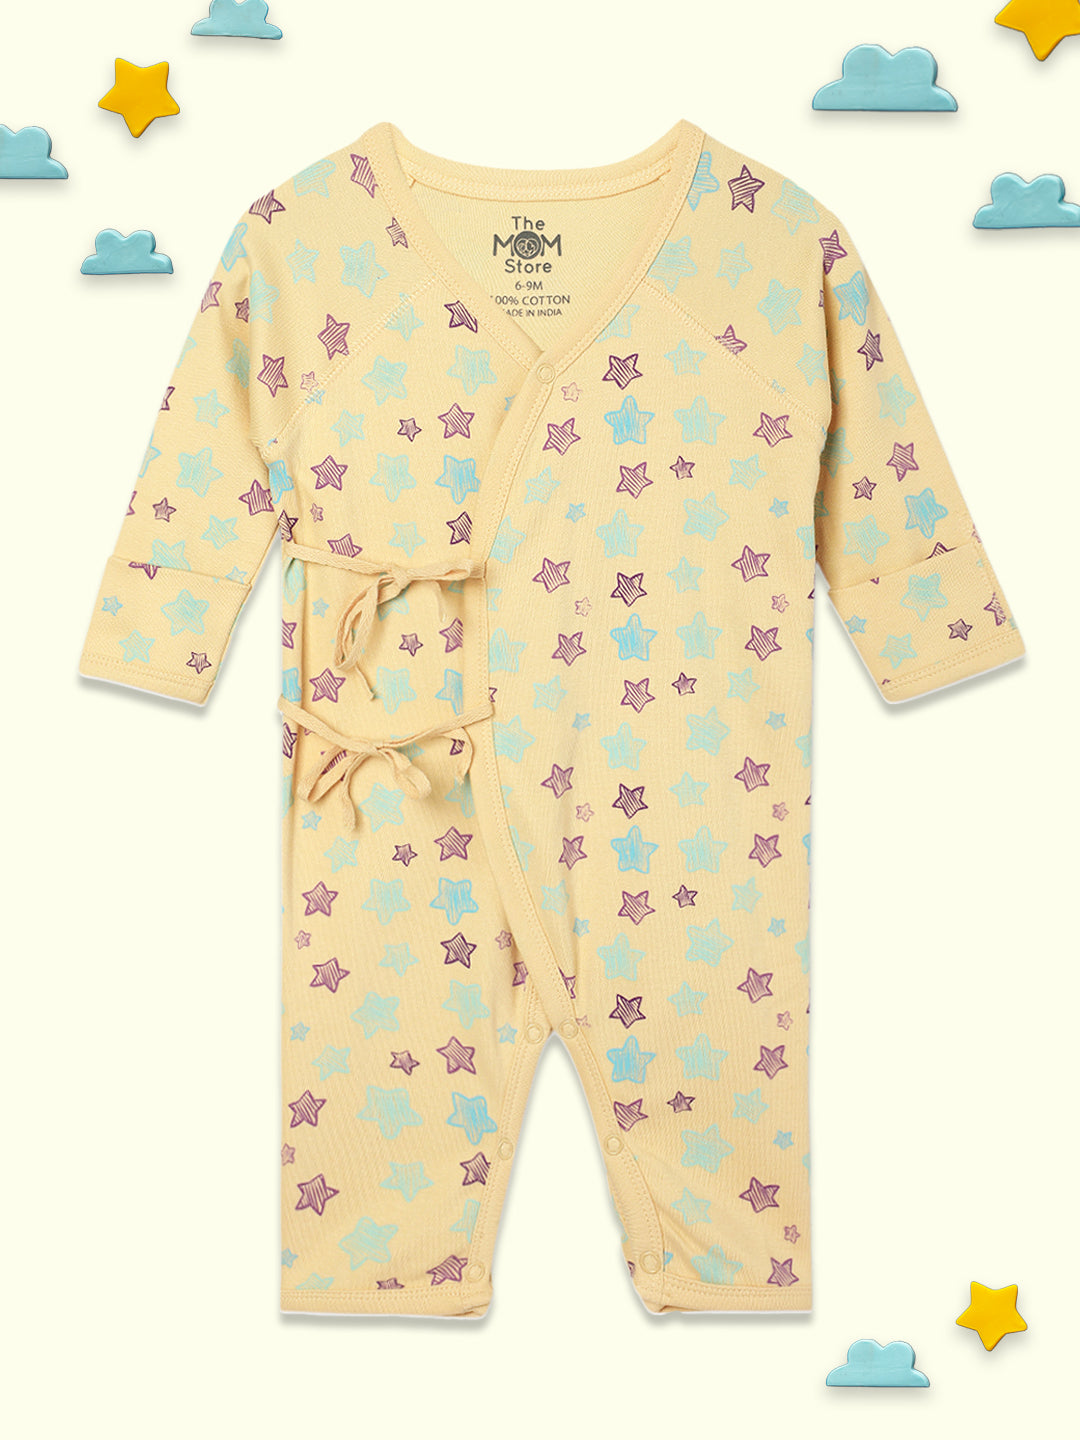 The Astros Infant Romper (Jabla Style)